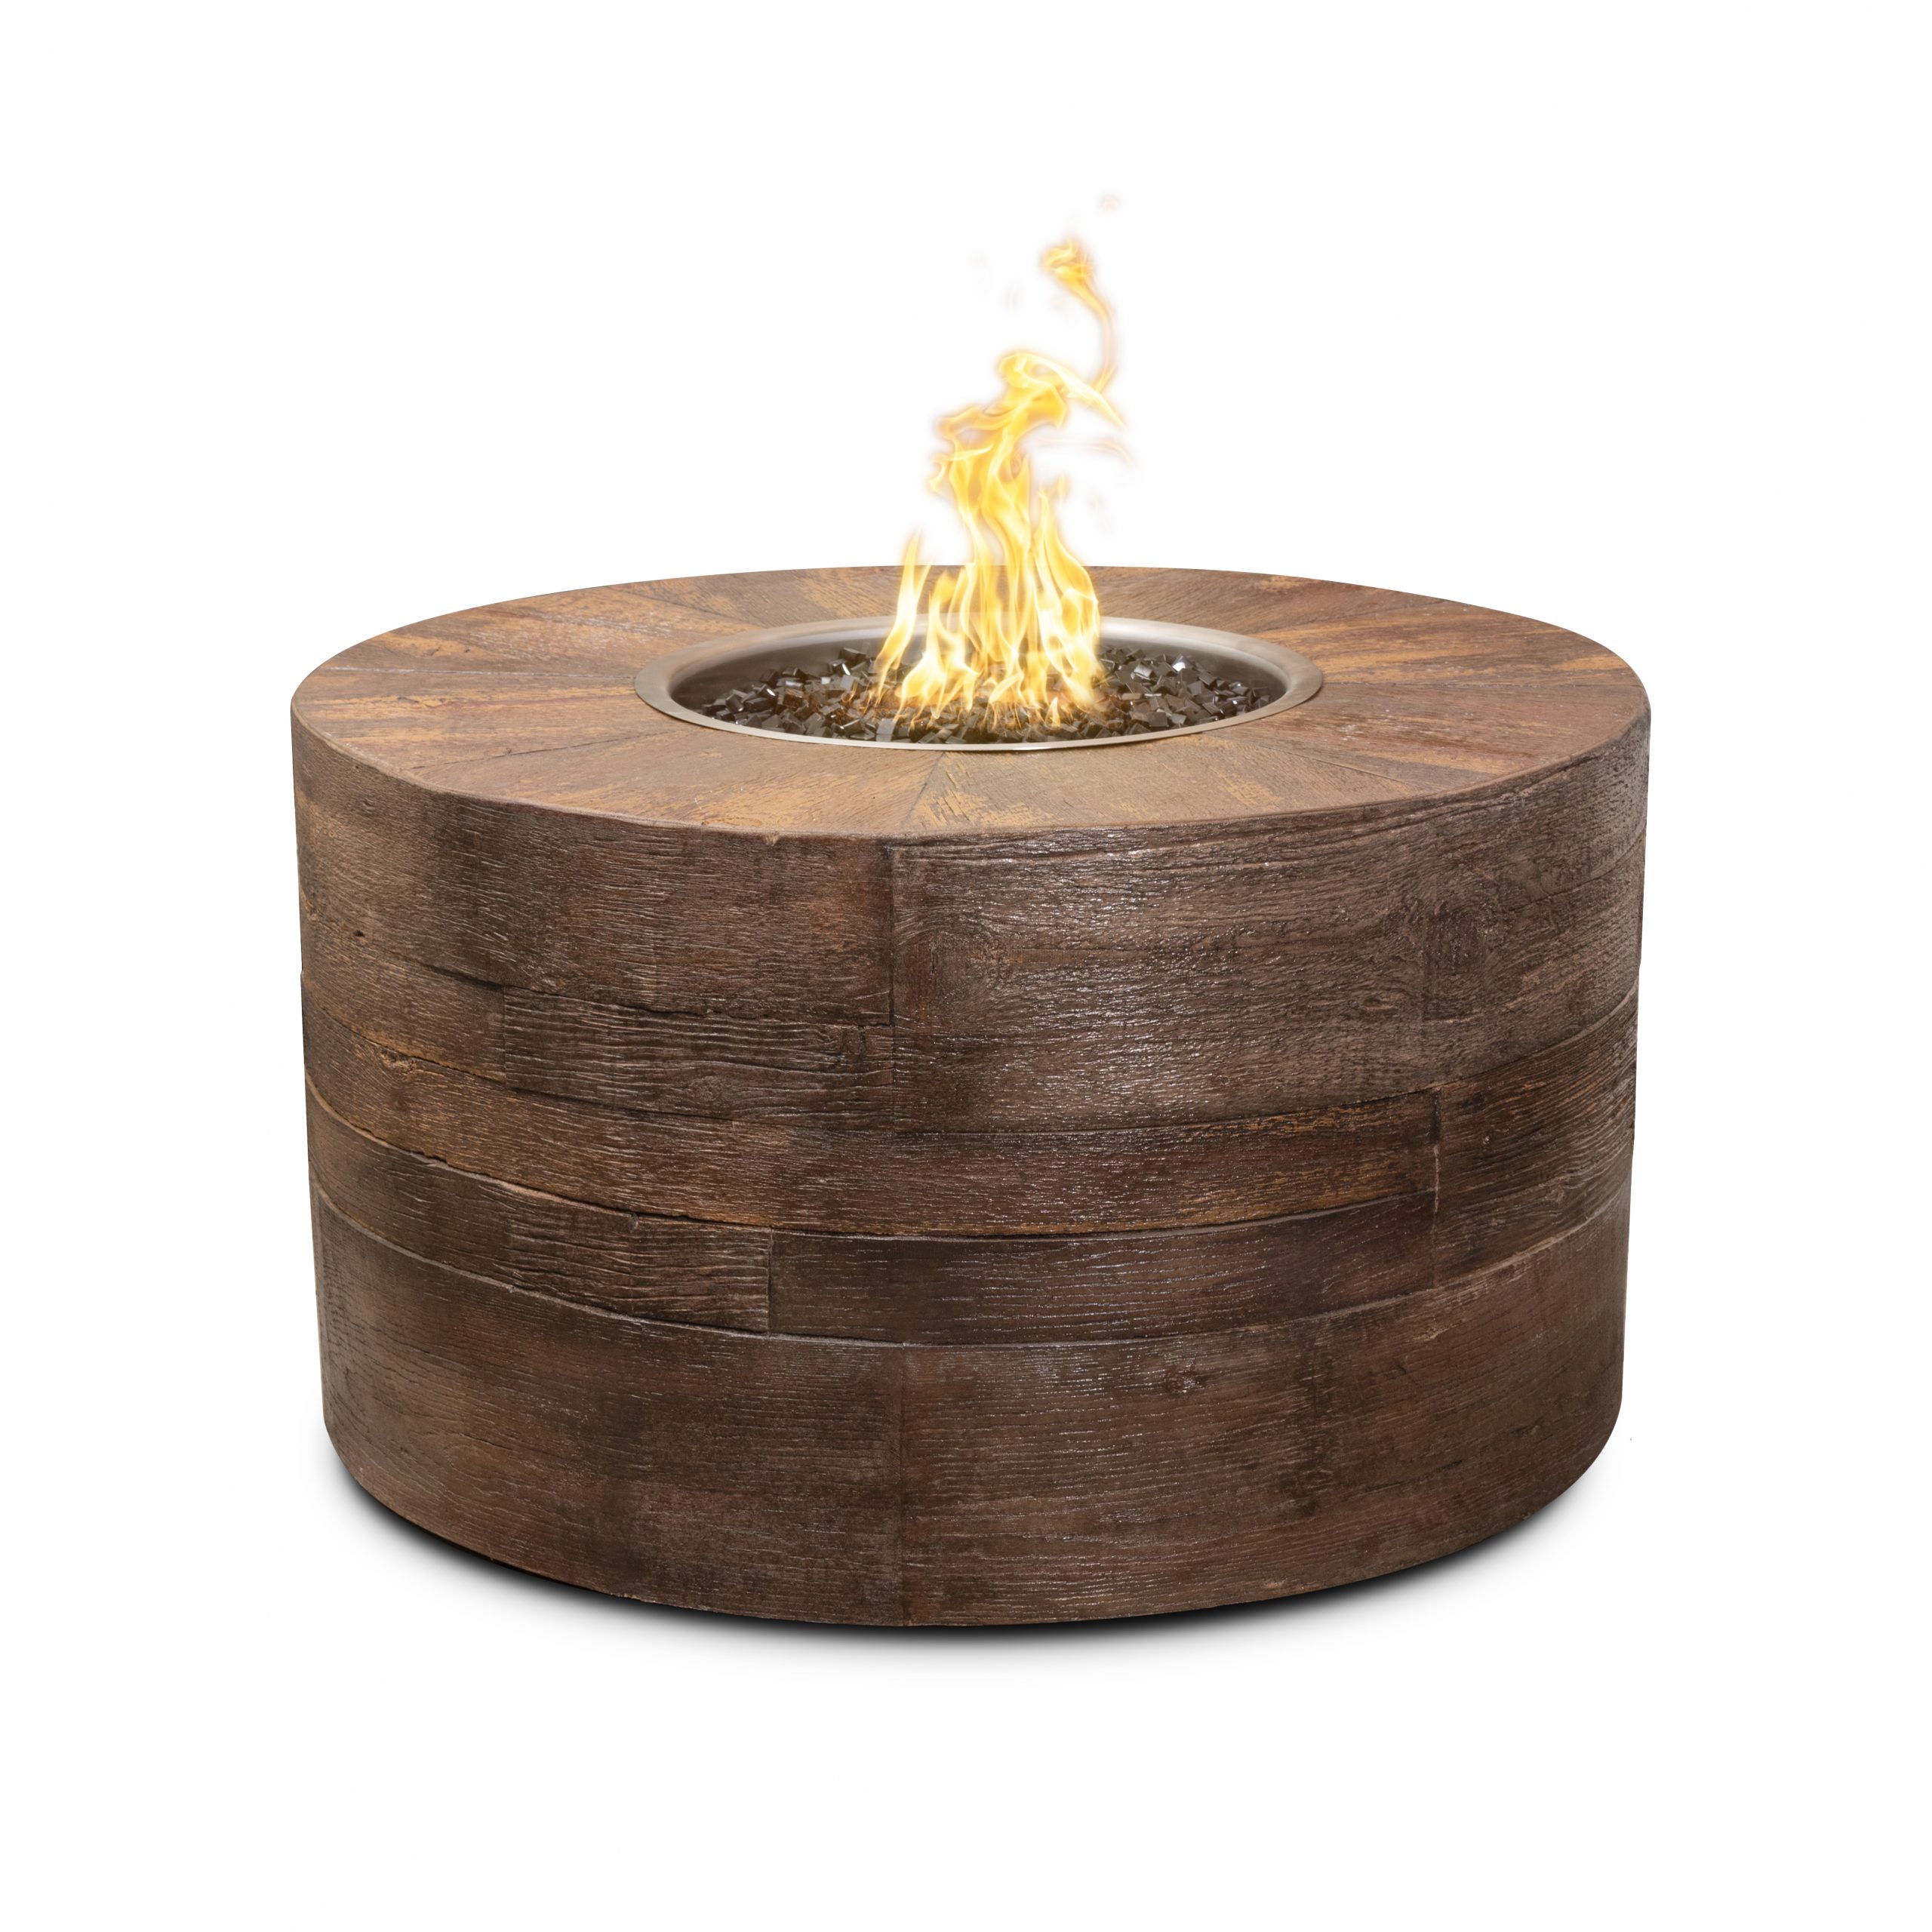 Sequoia Wood Grain Fire Pit The, Woodland Direct Fire Pits